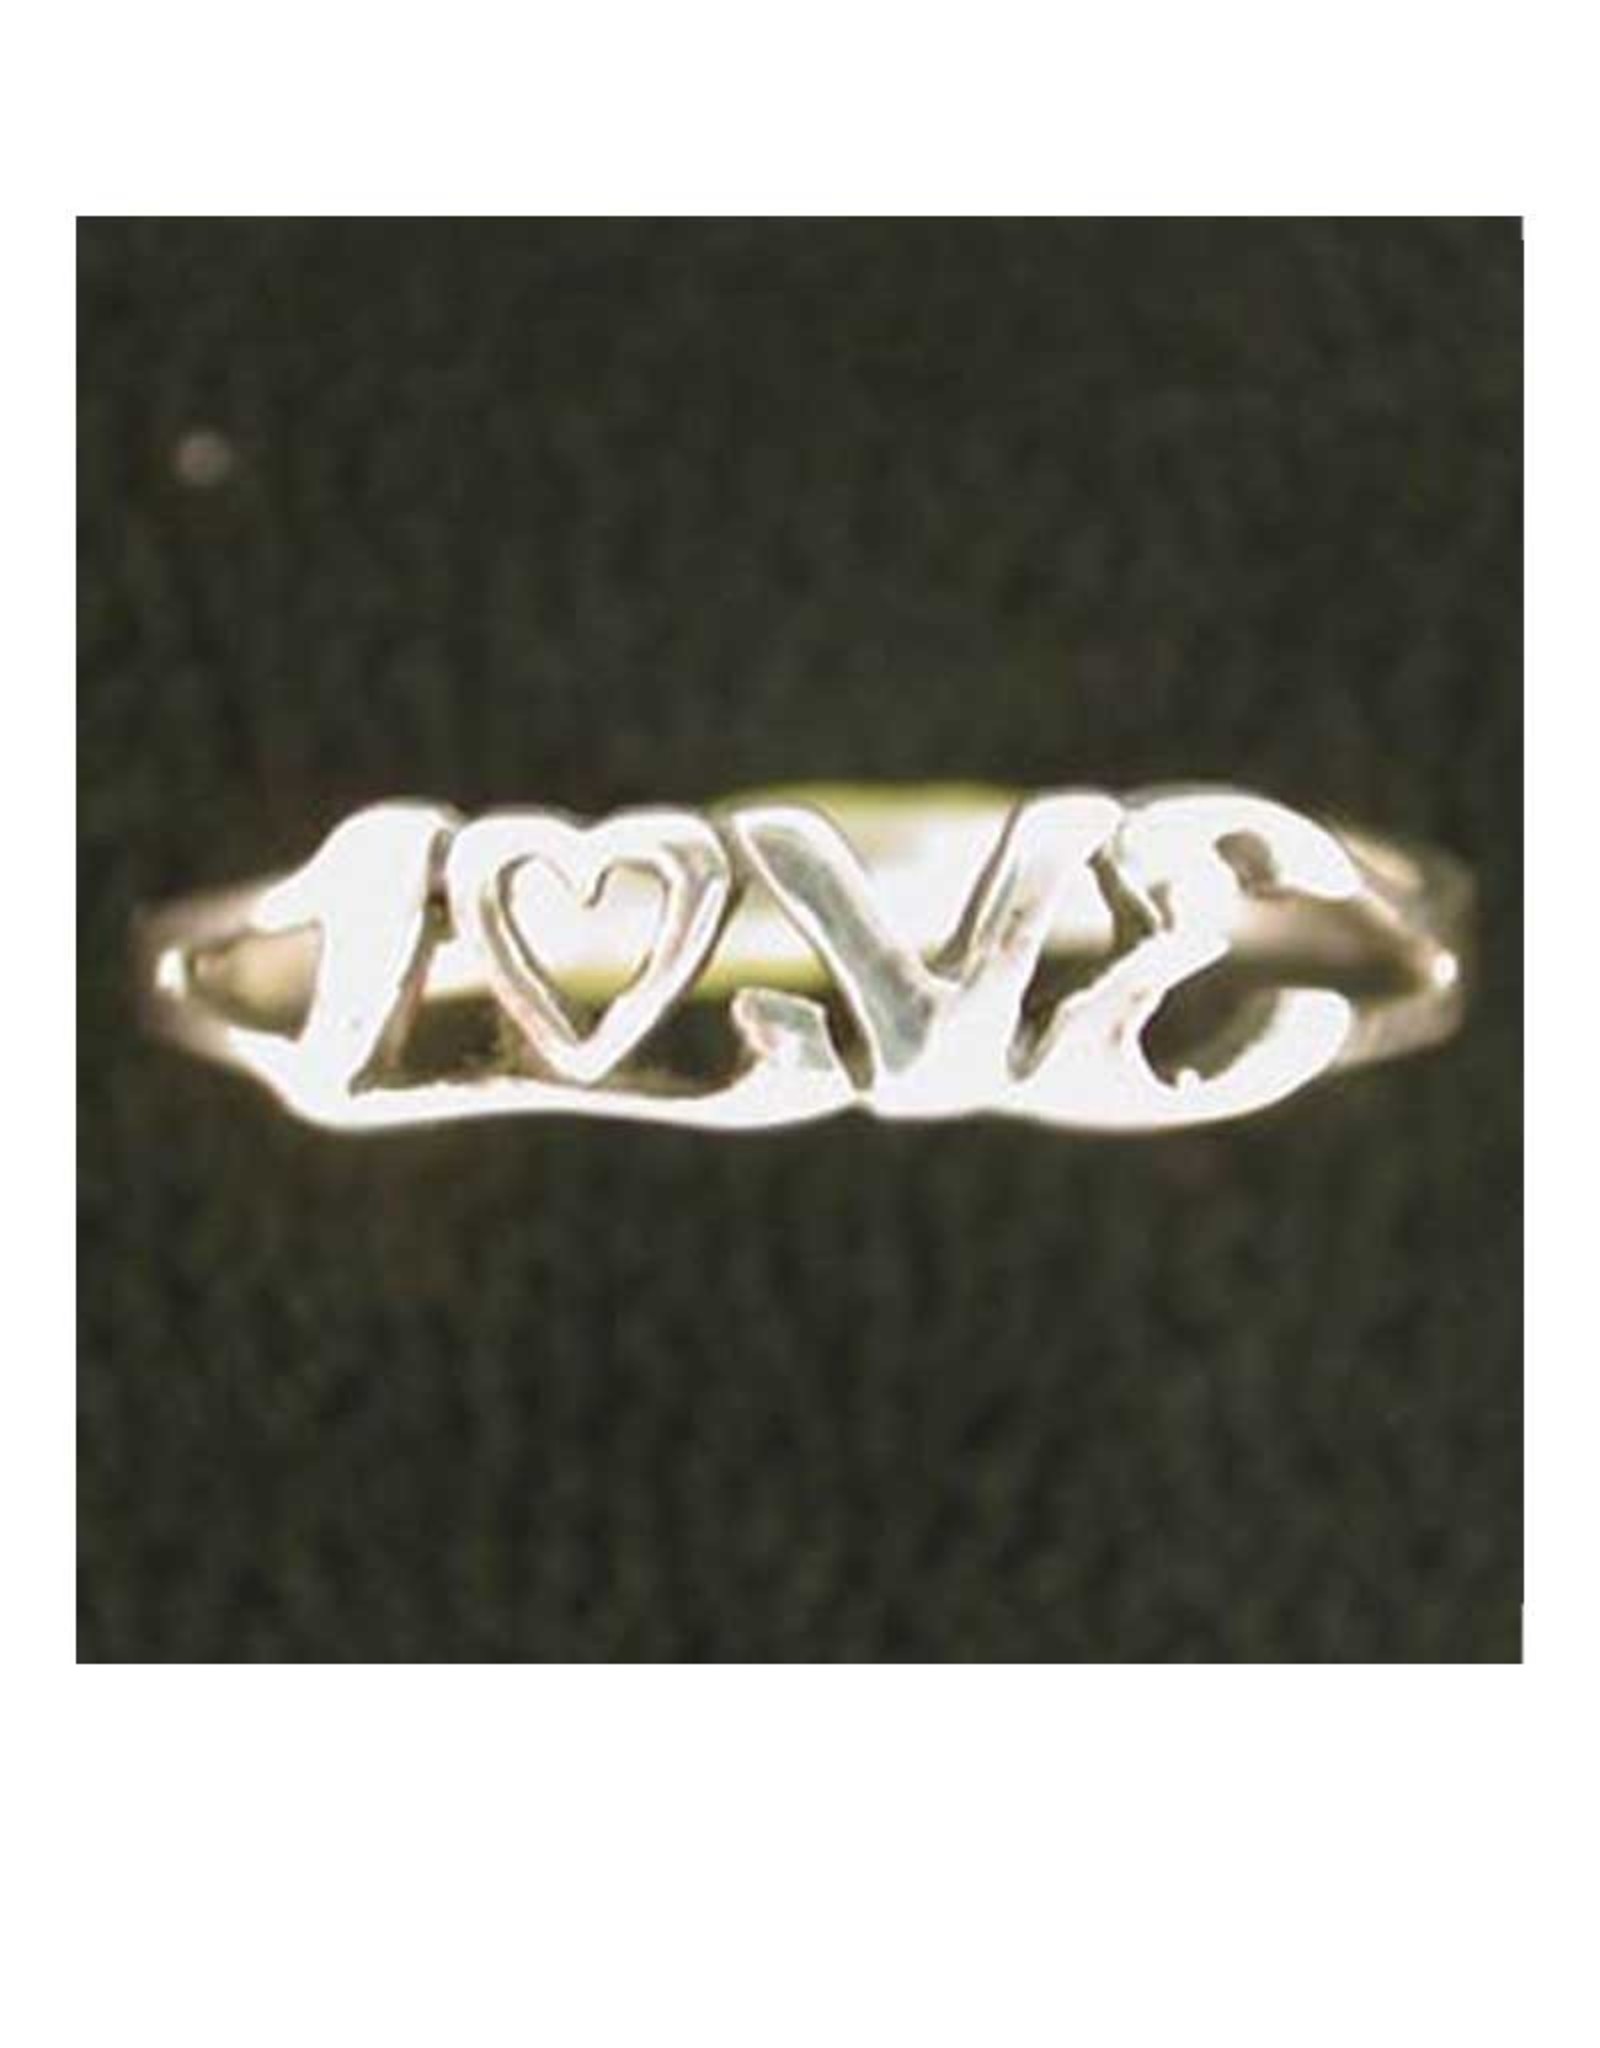 Love Ring Sterling Silver - Size 5